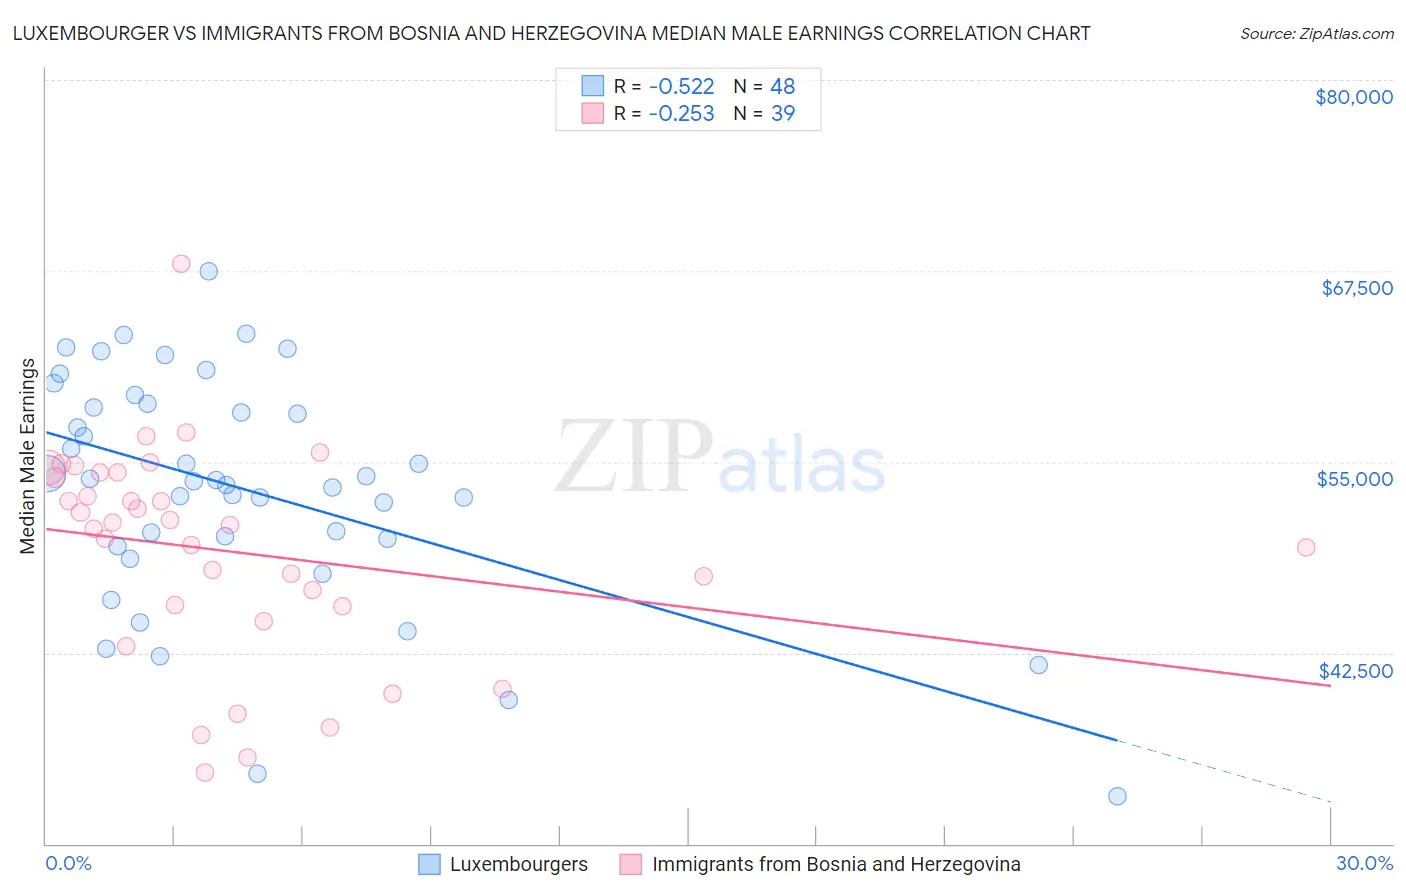 Luxembourger vs Immigrants from Bosnia and Herzegovina Median Male Earnings